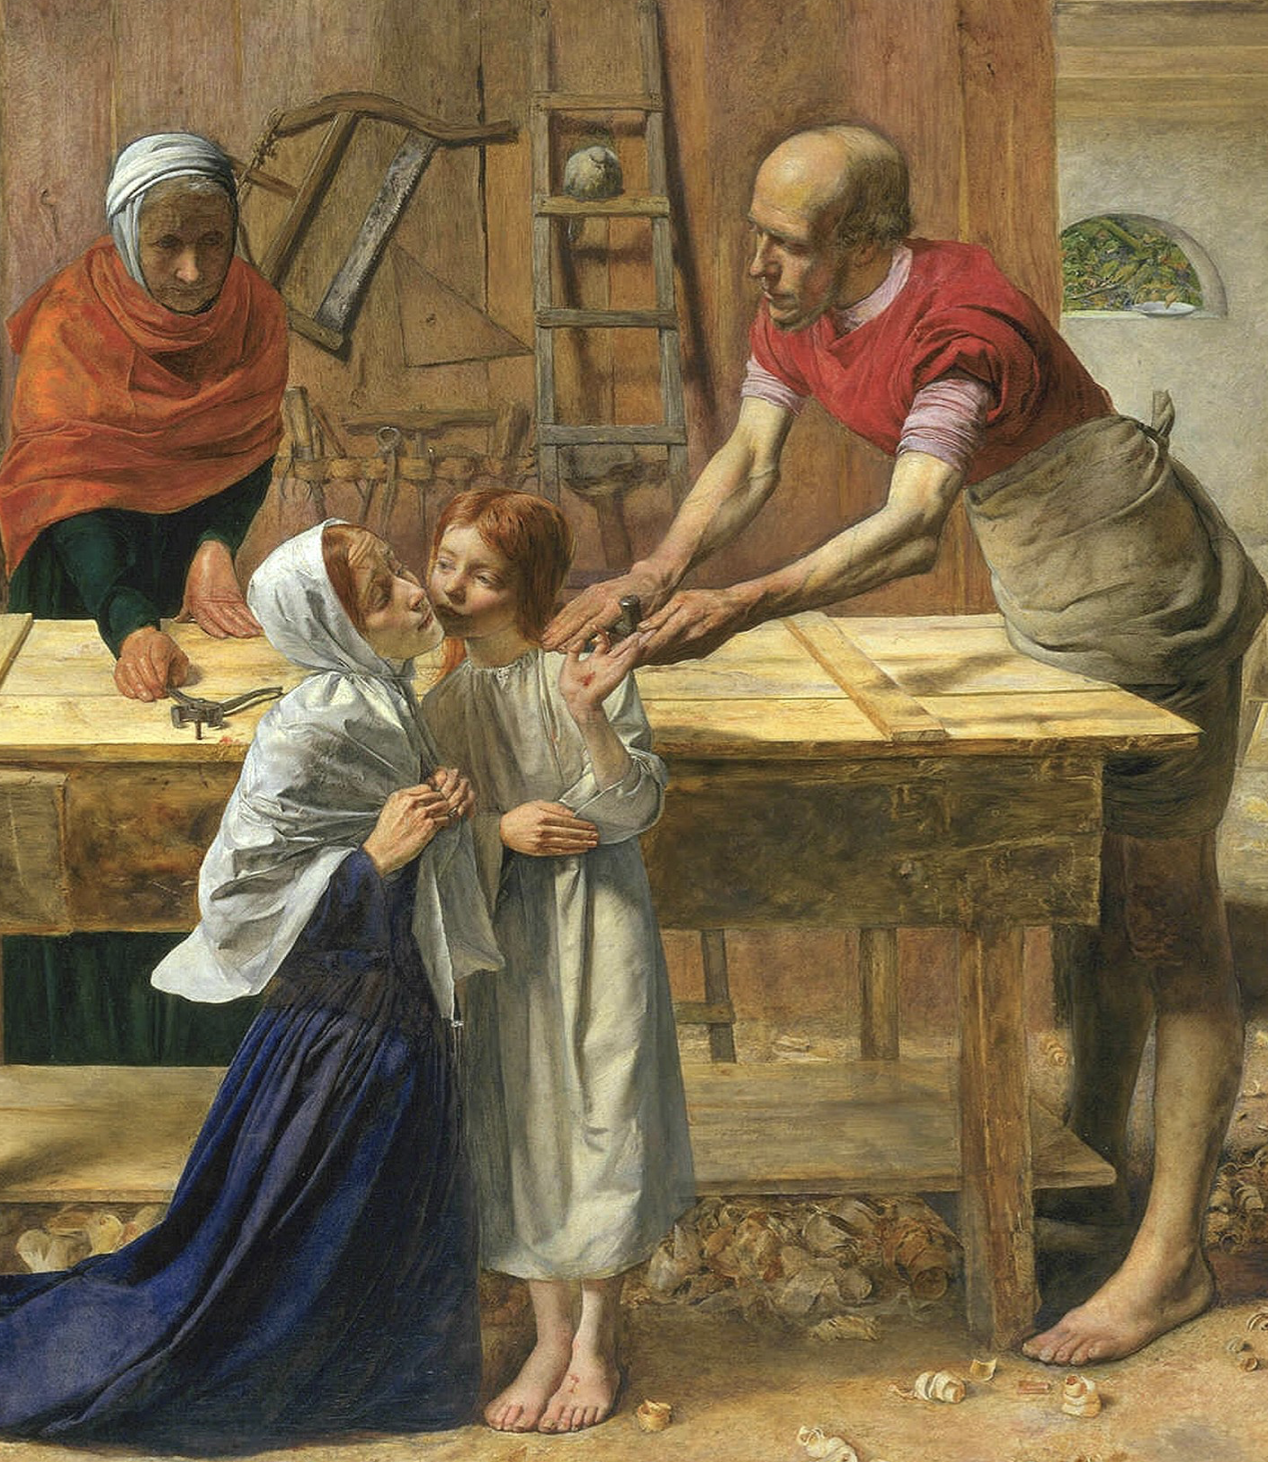 Christ in the House of his Parents, 1850, by John Everett Millais